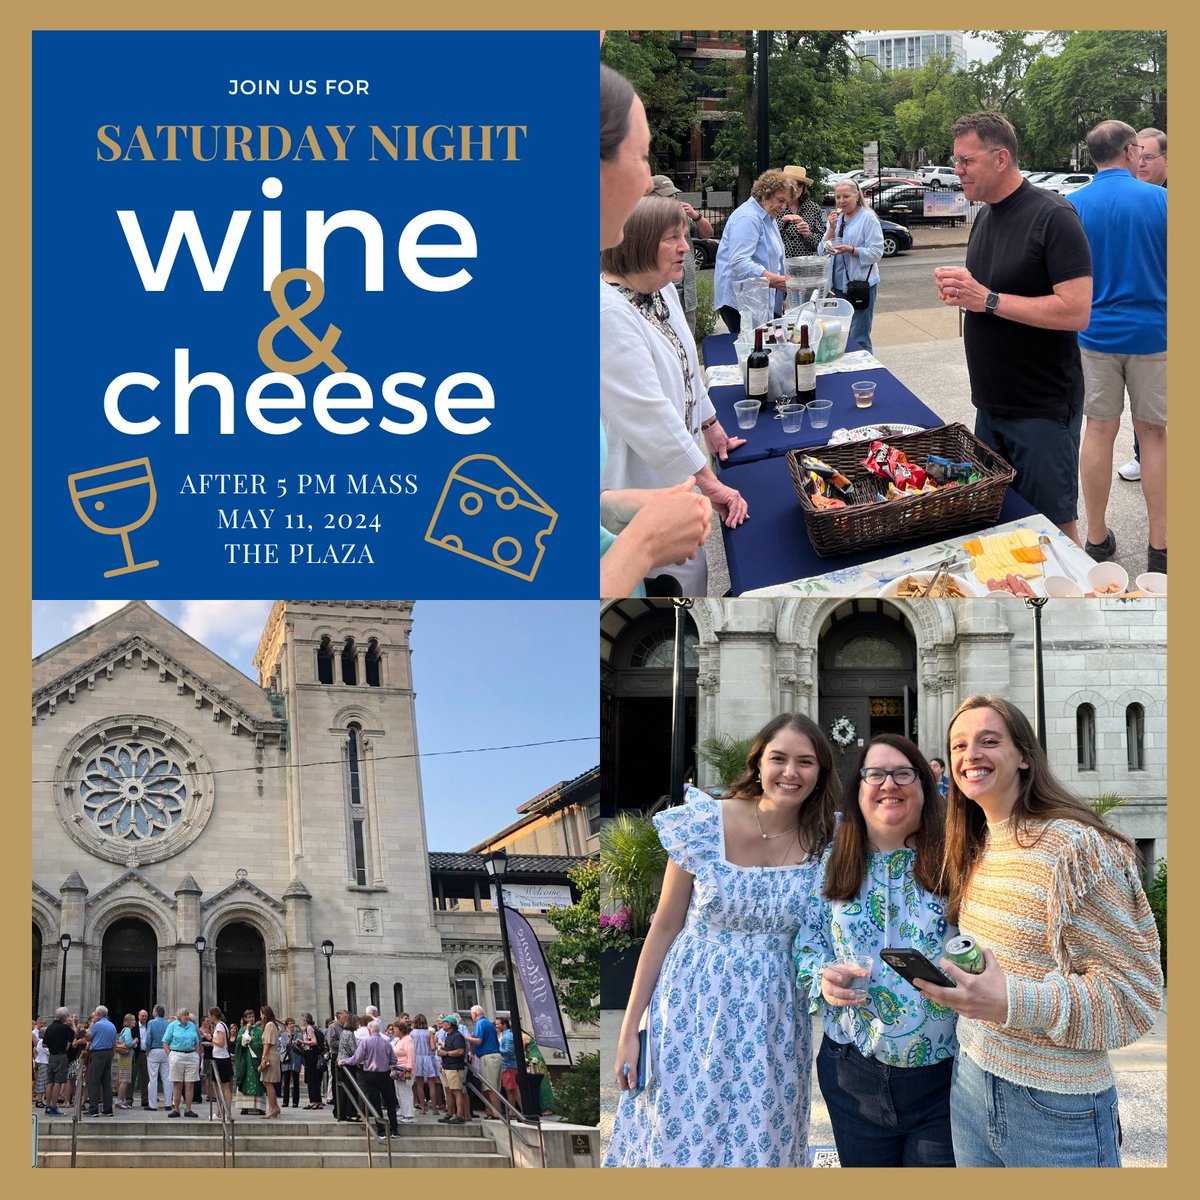 Saturday Night Wine + Cheese IS BACK! Join us in worship on Sat 5/11 at the 5pm Mass, followed by our social event!  We hope to see you there!

#saintclementparish #anchoredincommunity #wineandcheese #weekendhospitality #joinus #community #chicagocatholic